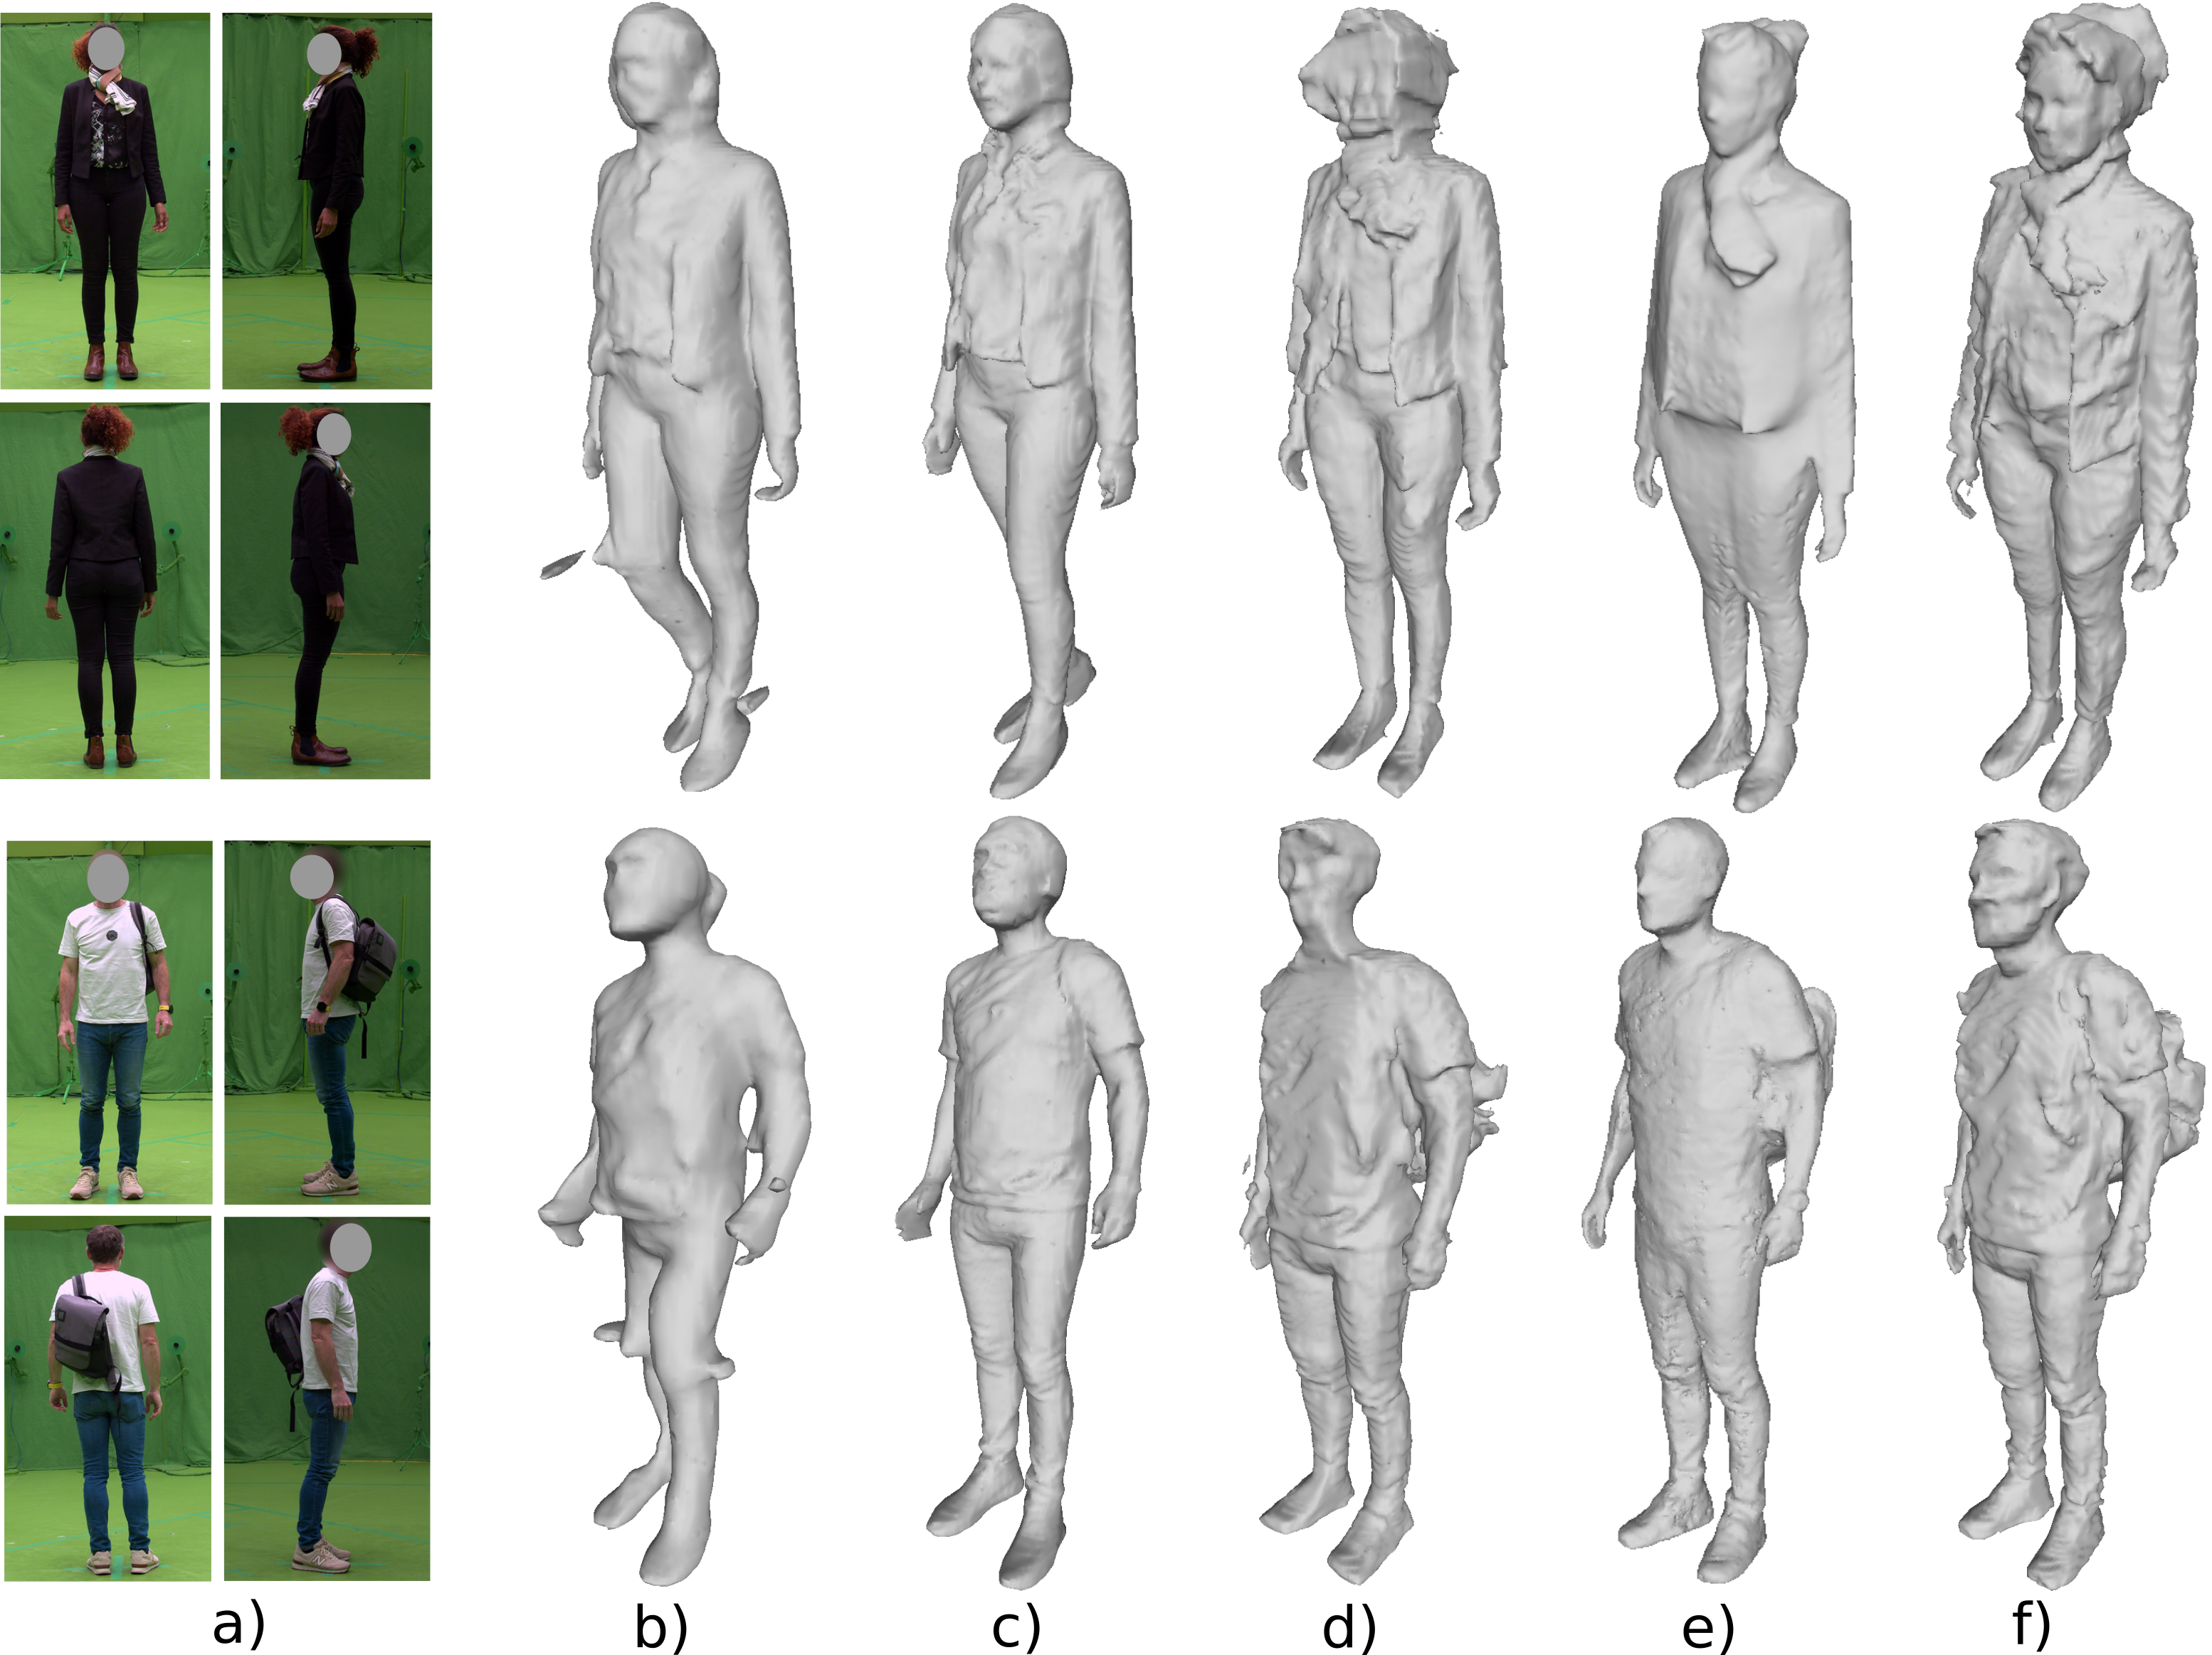 The figure shows reconstruction results: a) Real scene cropped images. b) PIFu [Saito et al. 2019] and c) PIFuHD [Saito et al. 2020] with a single frontal view. d) PIFu with 4 views. e) Multi-view stereo [Leroy et al. 2018] reconstruction with 60 views. f) Our method with 4 views.